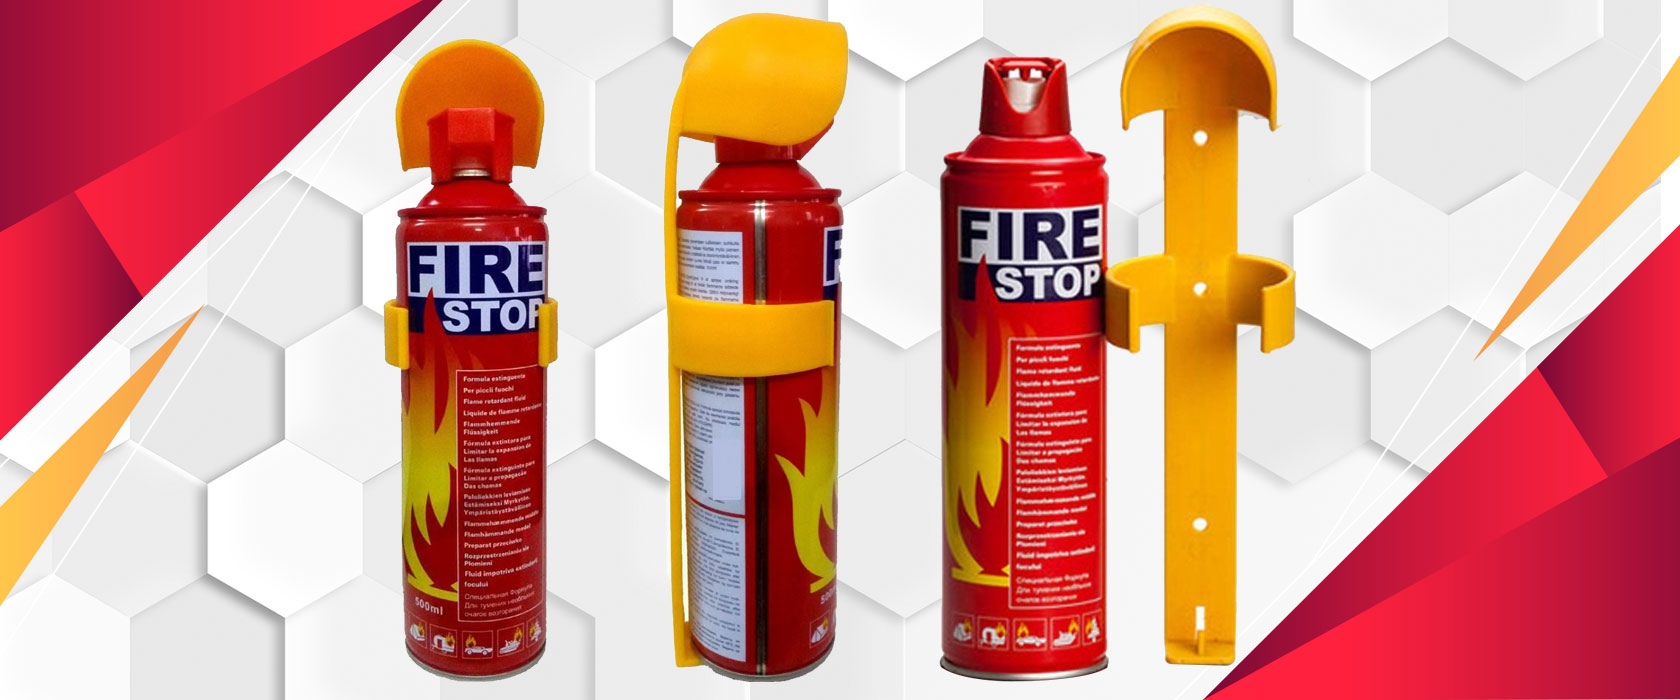 Car Fire Extinguisher Suppliers in Chennai